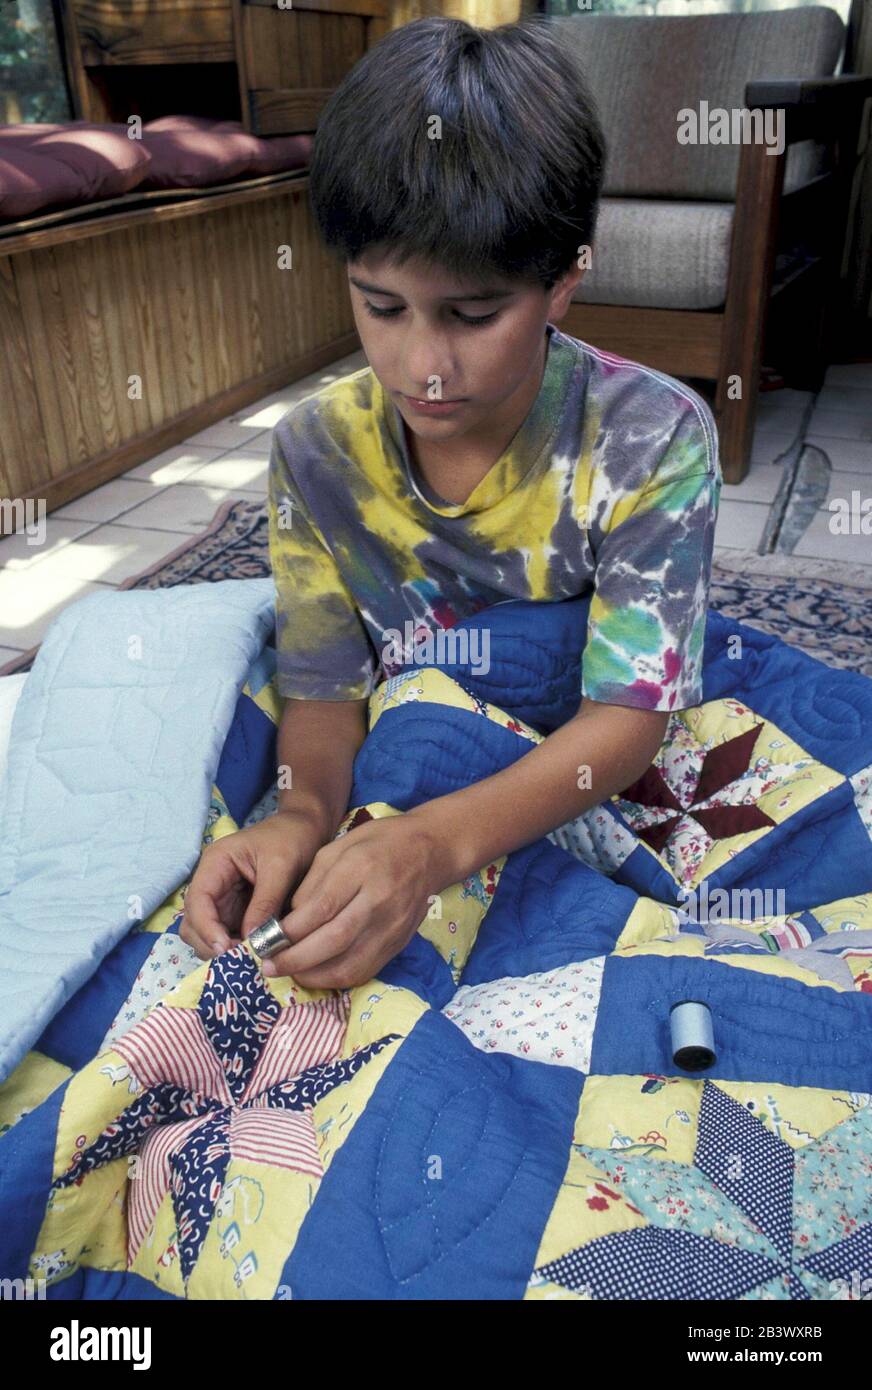 Austin Texas USA: Hispanic boy using a needle, thread and thimble while putting together a quilt. ©Bob Daemmrich Stock Photo